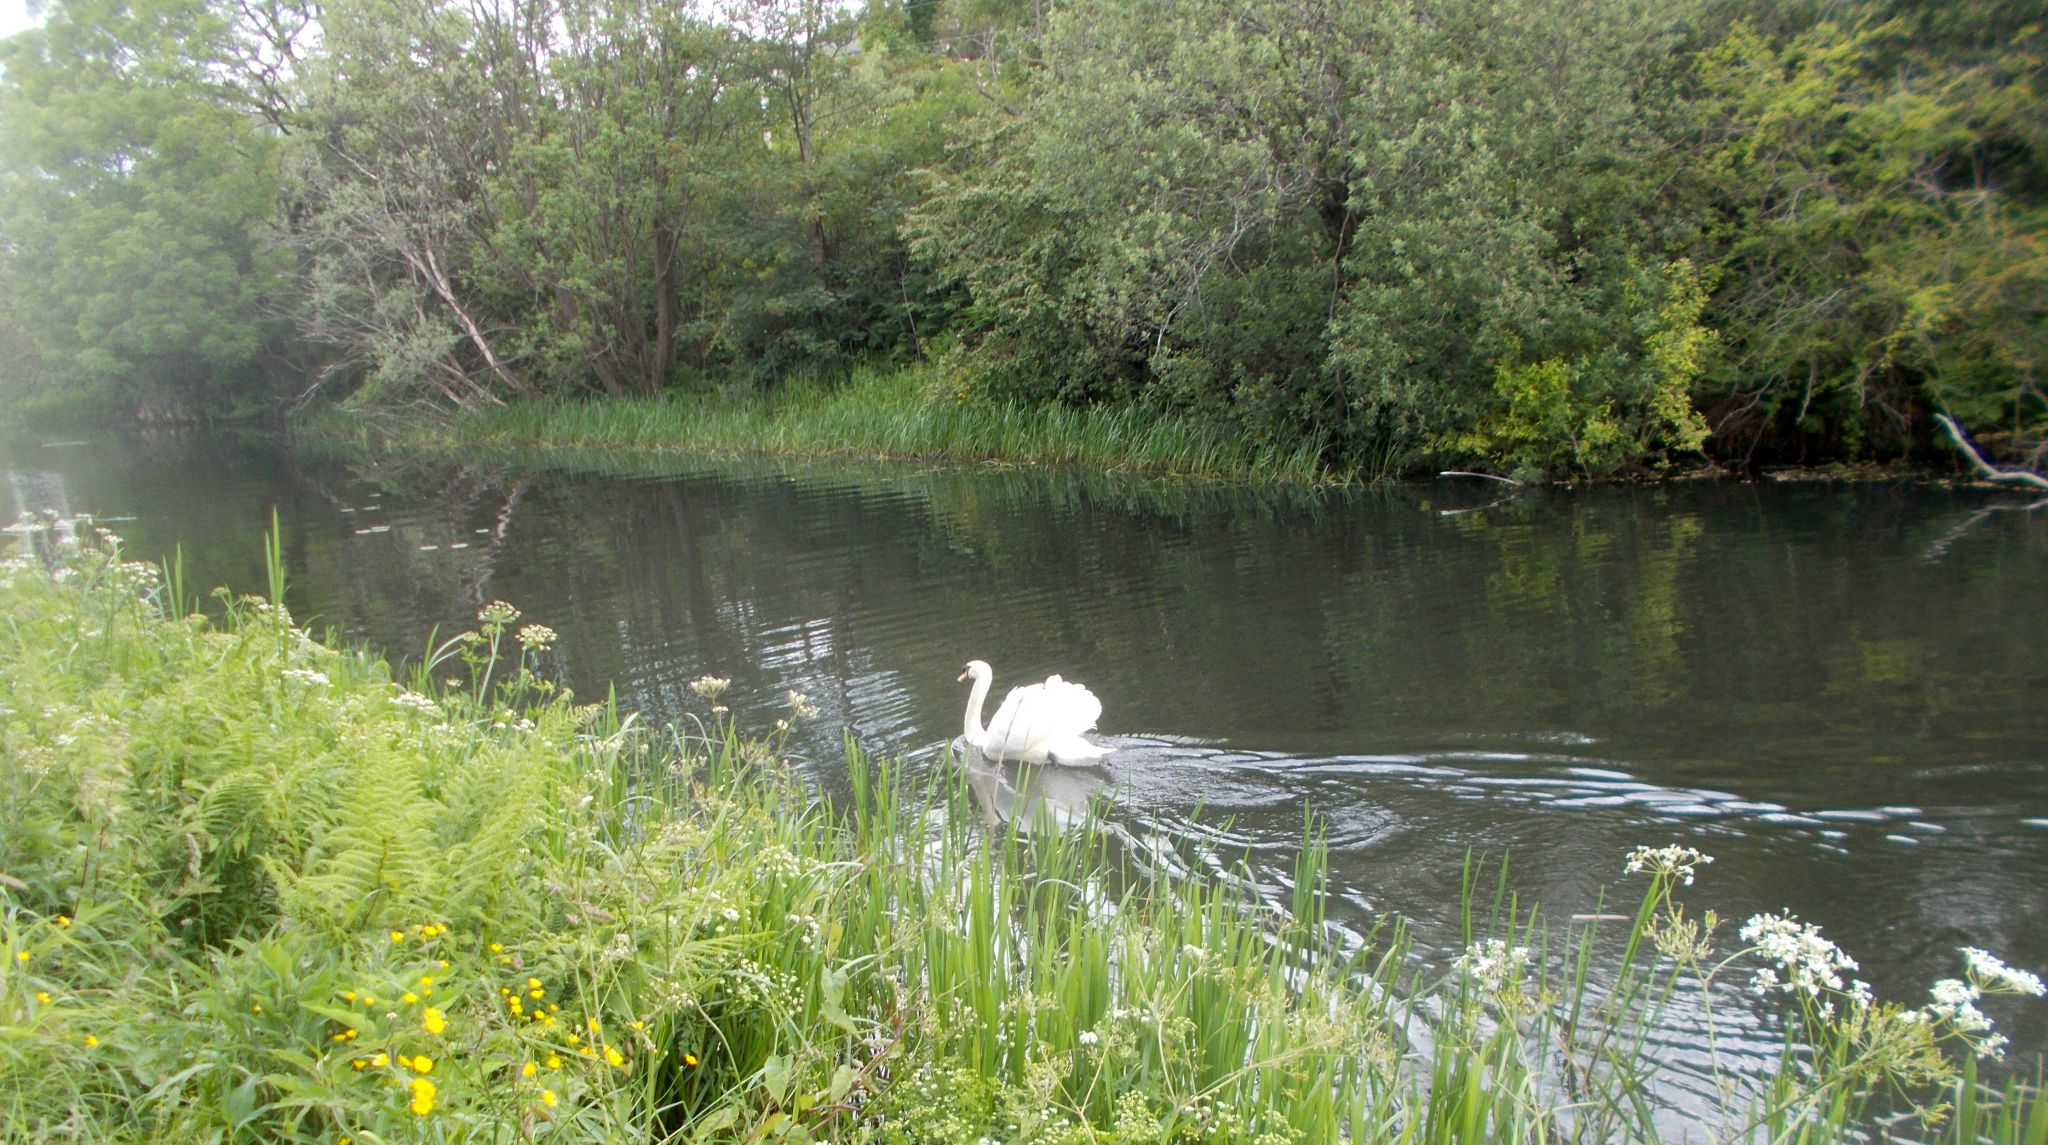 Swan on the Forth and Clyde Canal